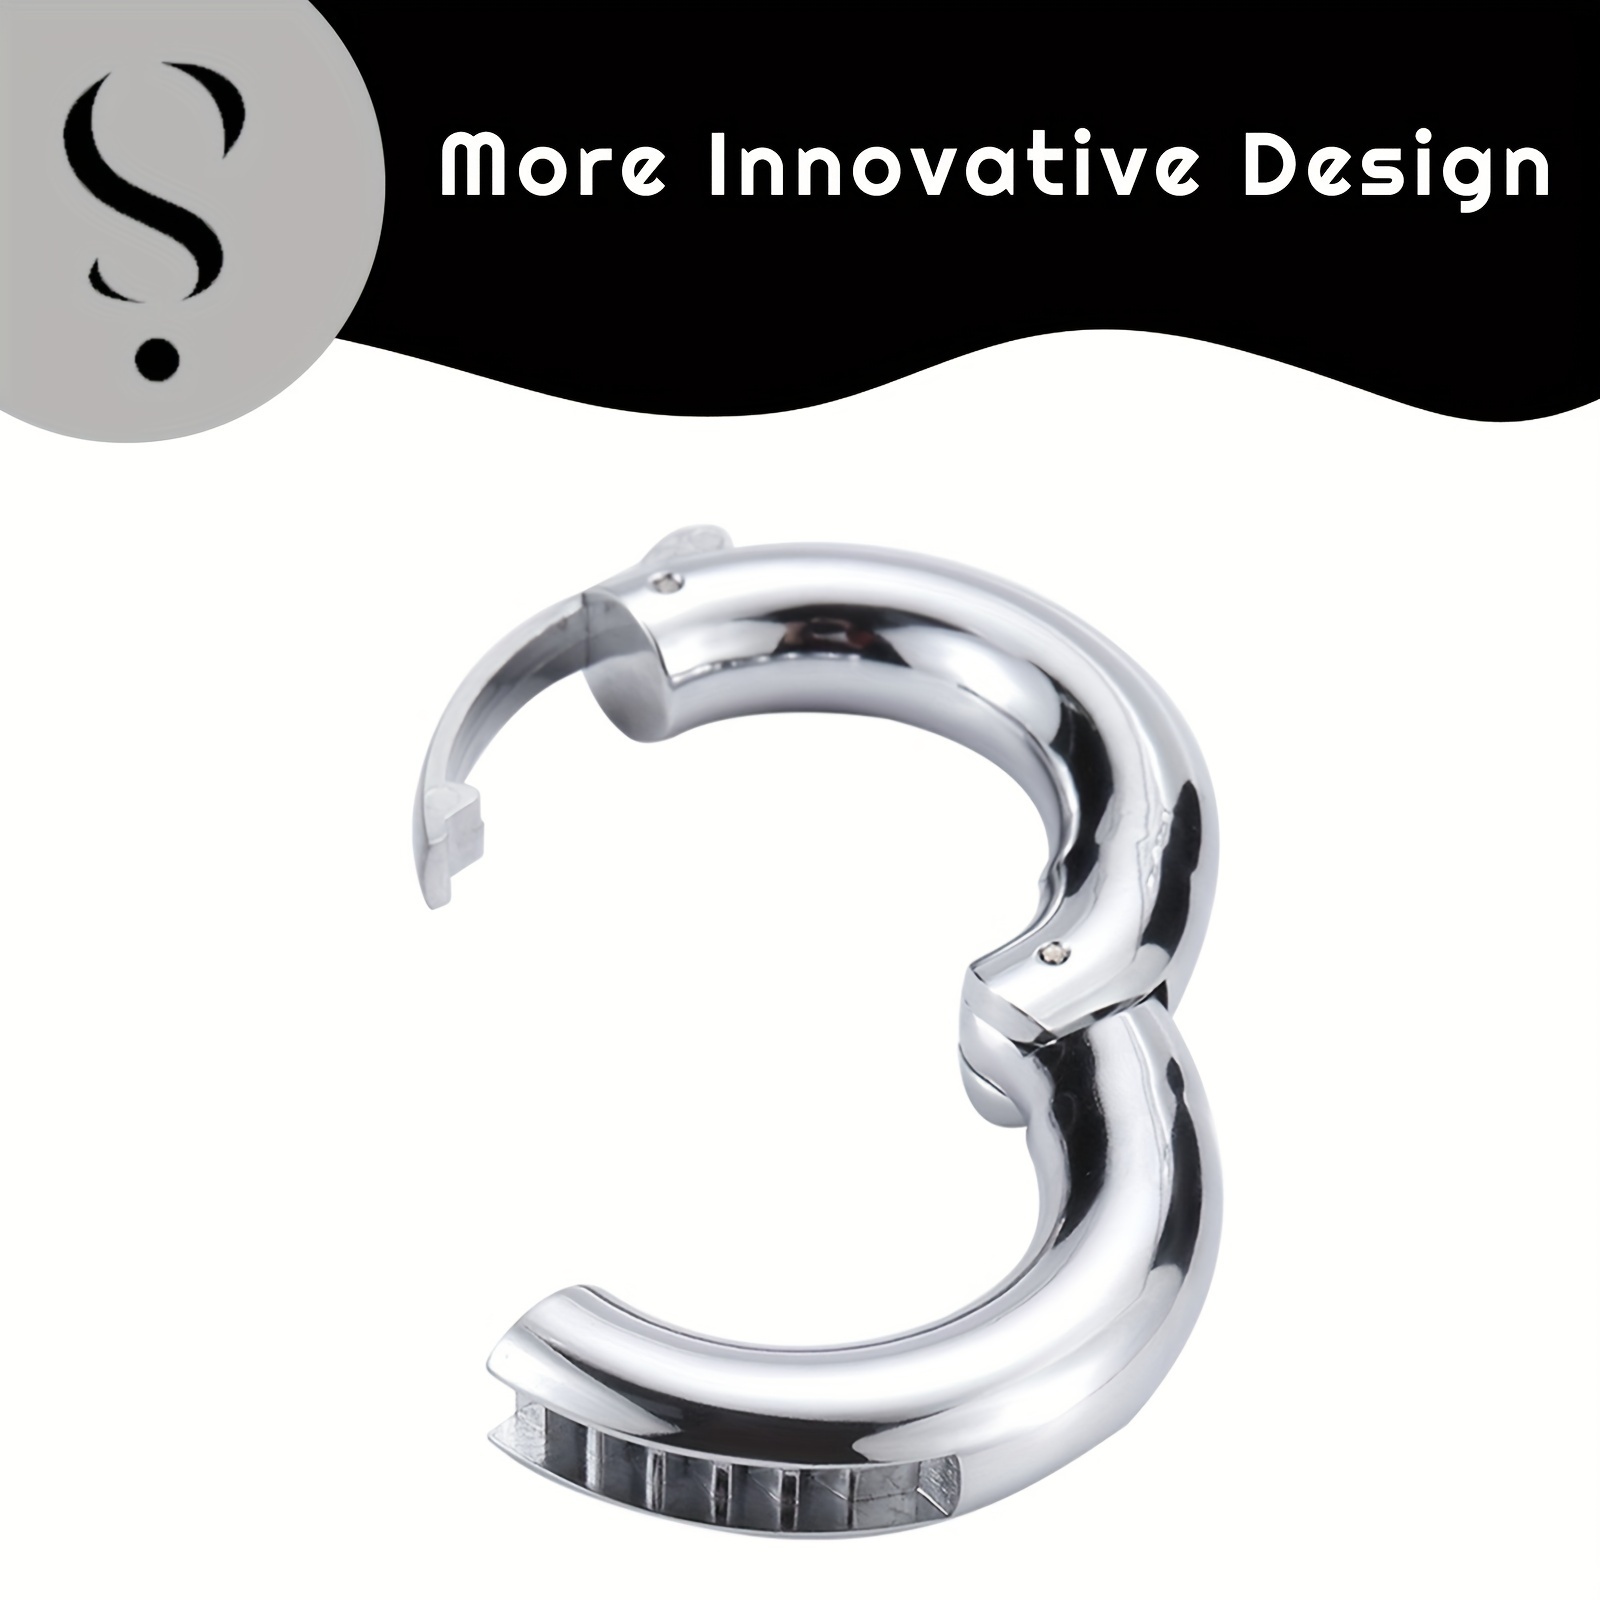 Men's Stainless Steel Glans Head Penis Ring Delay Sexual Stimulation 7 Sizes